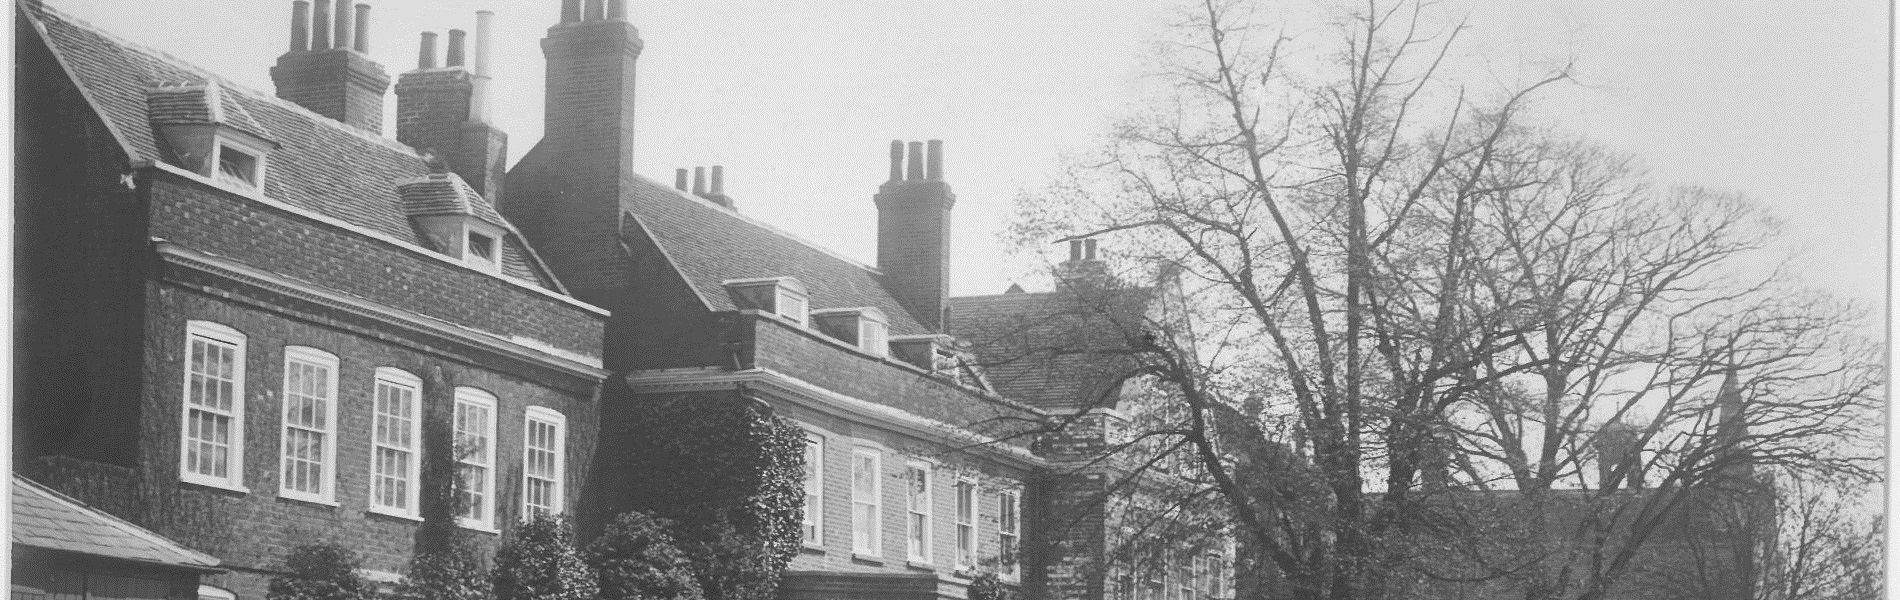 Old Big School and the Chapel, 1926